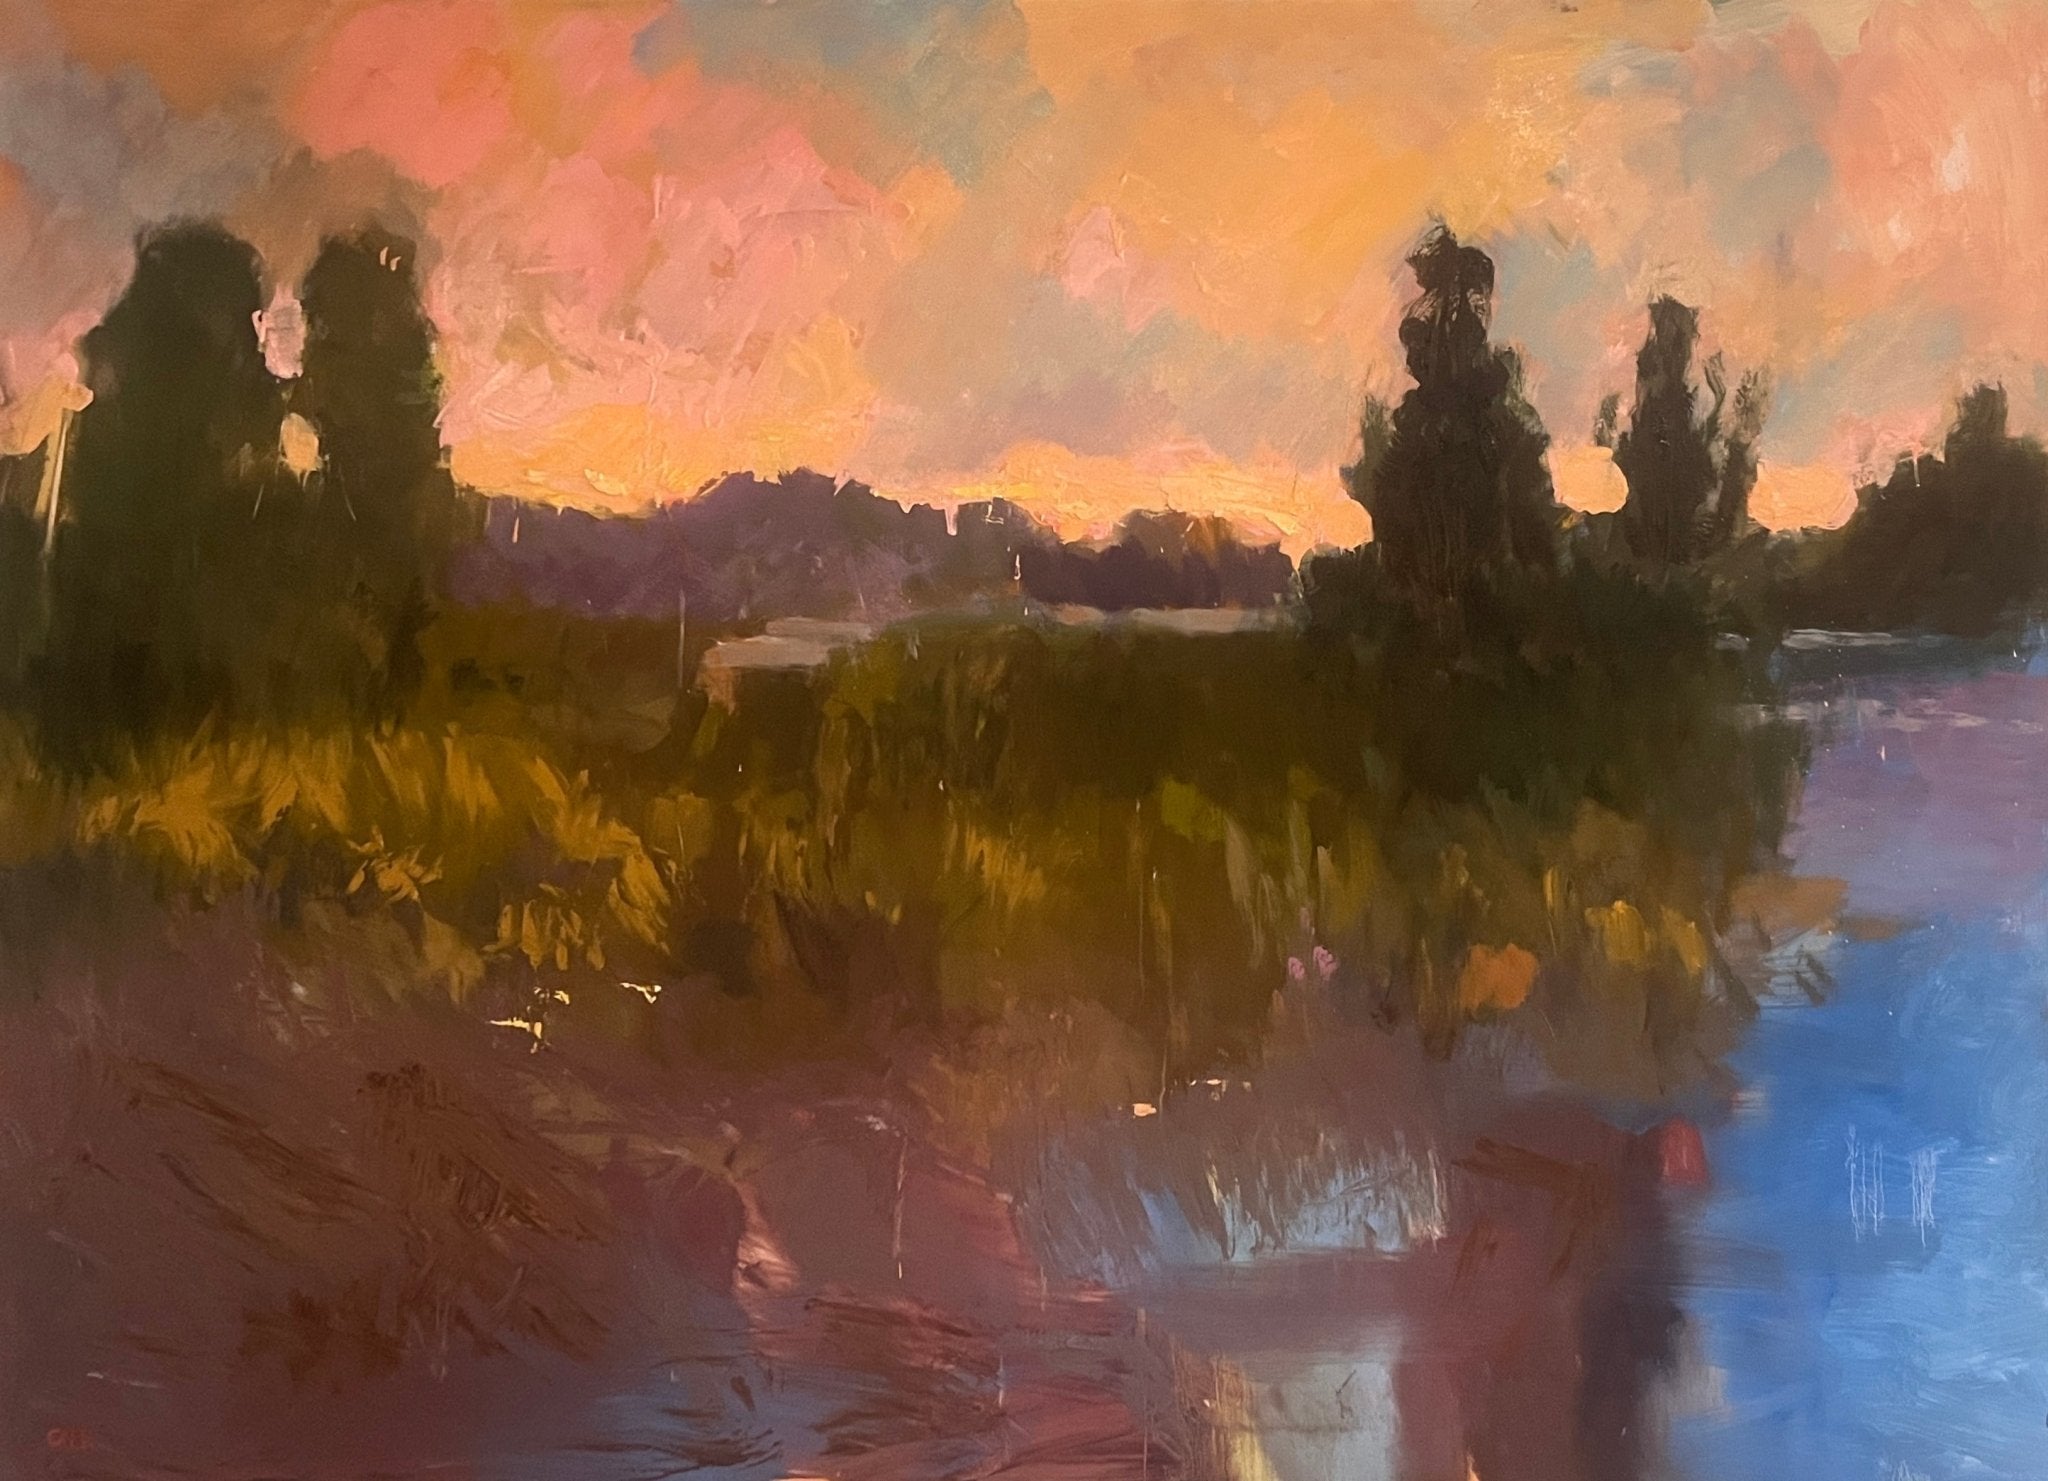 Pluff Mud by James Calk at LePrince Galleries